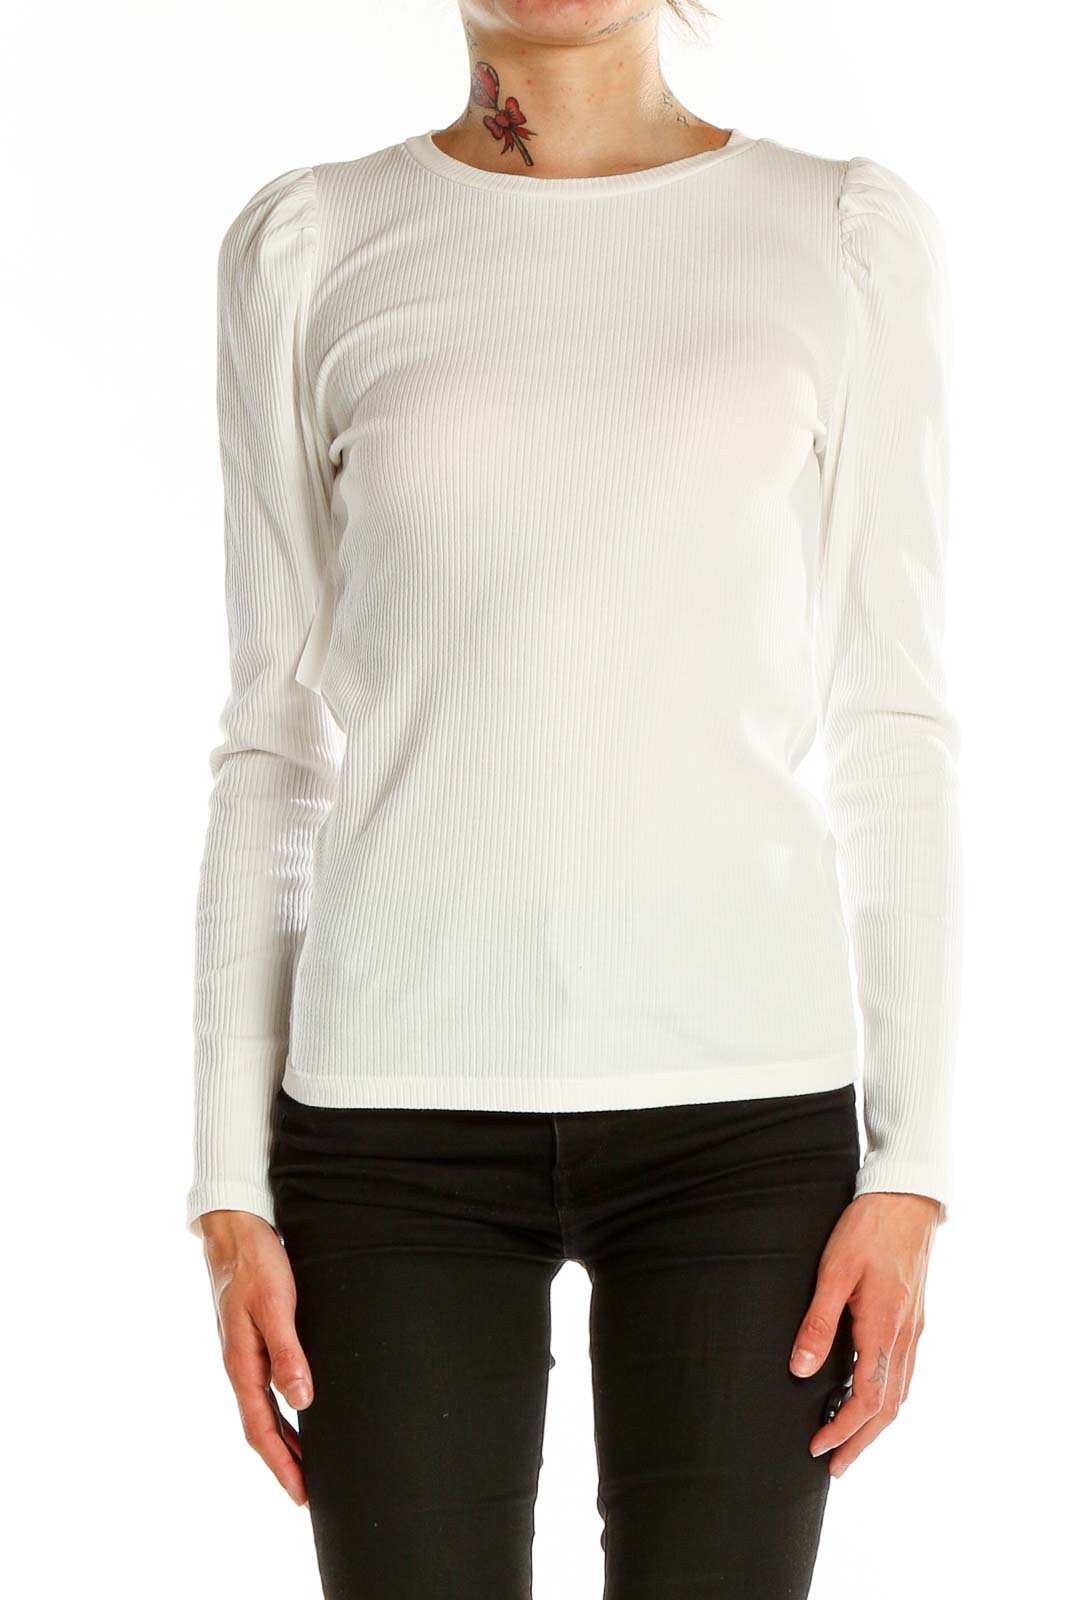 White Puff Sleeve Casual Long-Sleeve Shirt Front